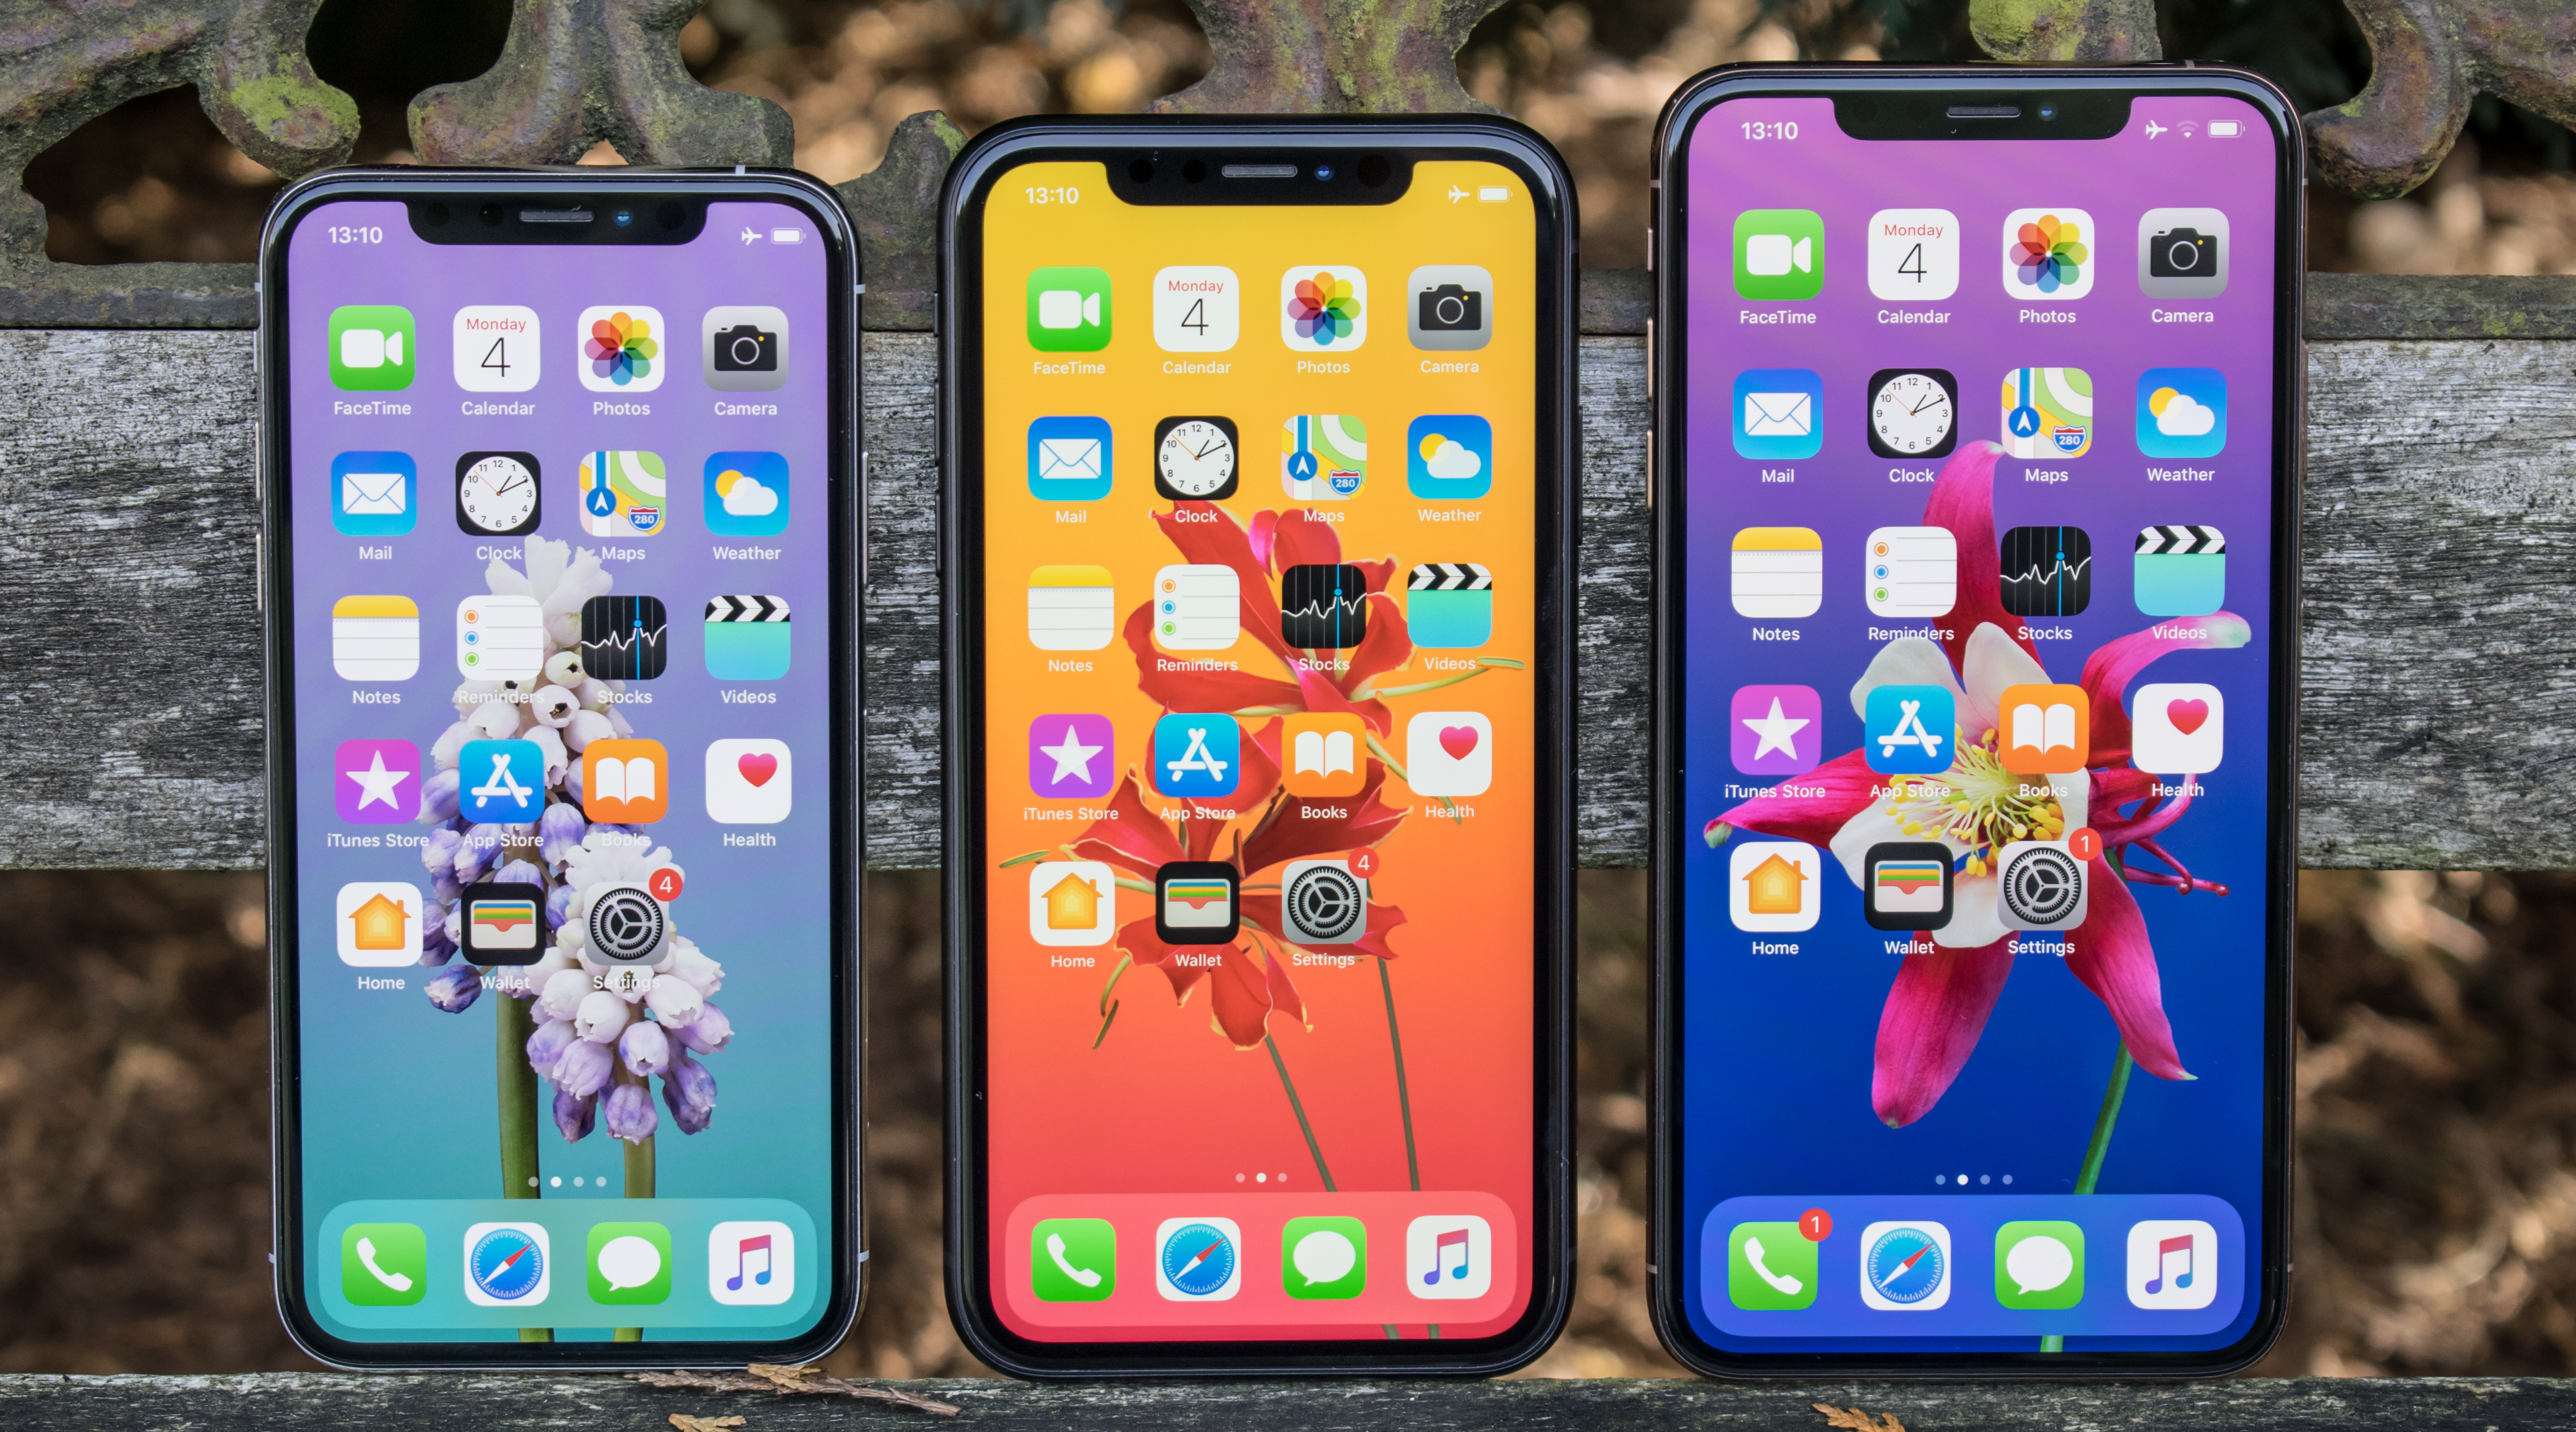 The Apple Iphone Xr Review A Different Display Leads To Brilliant